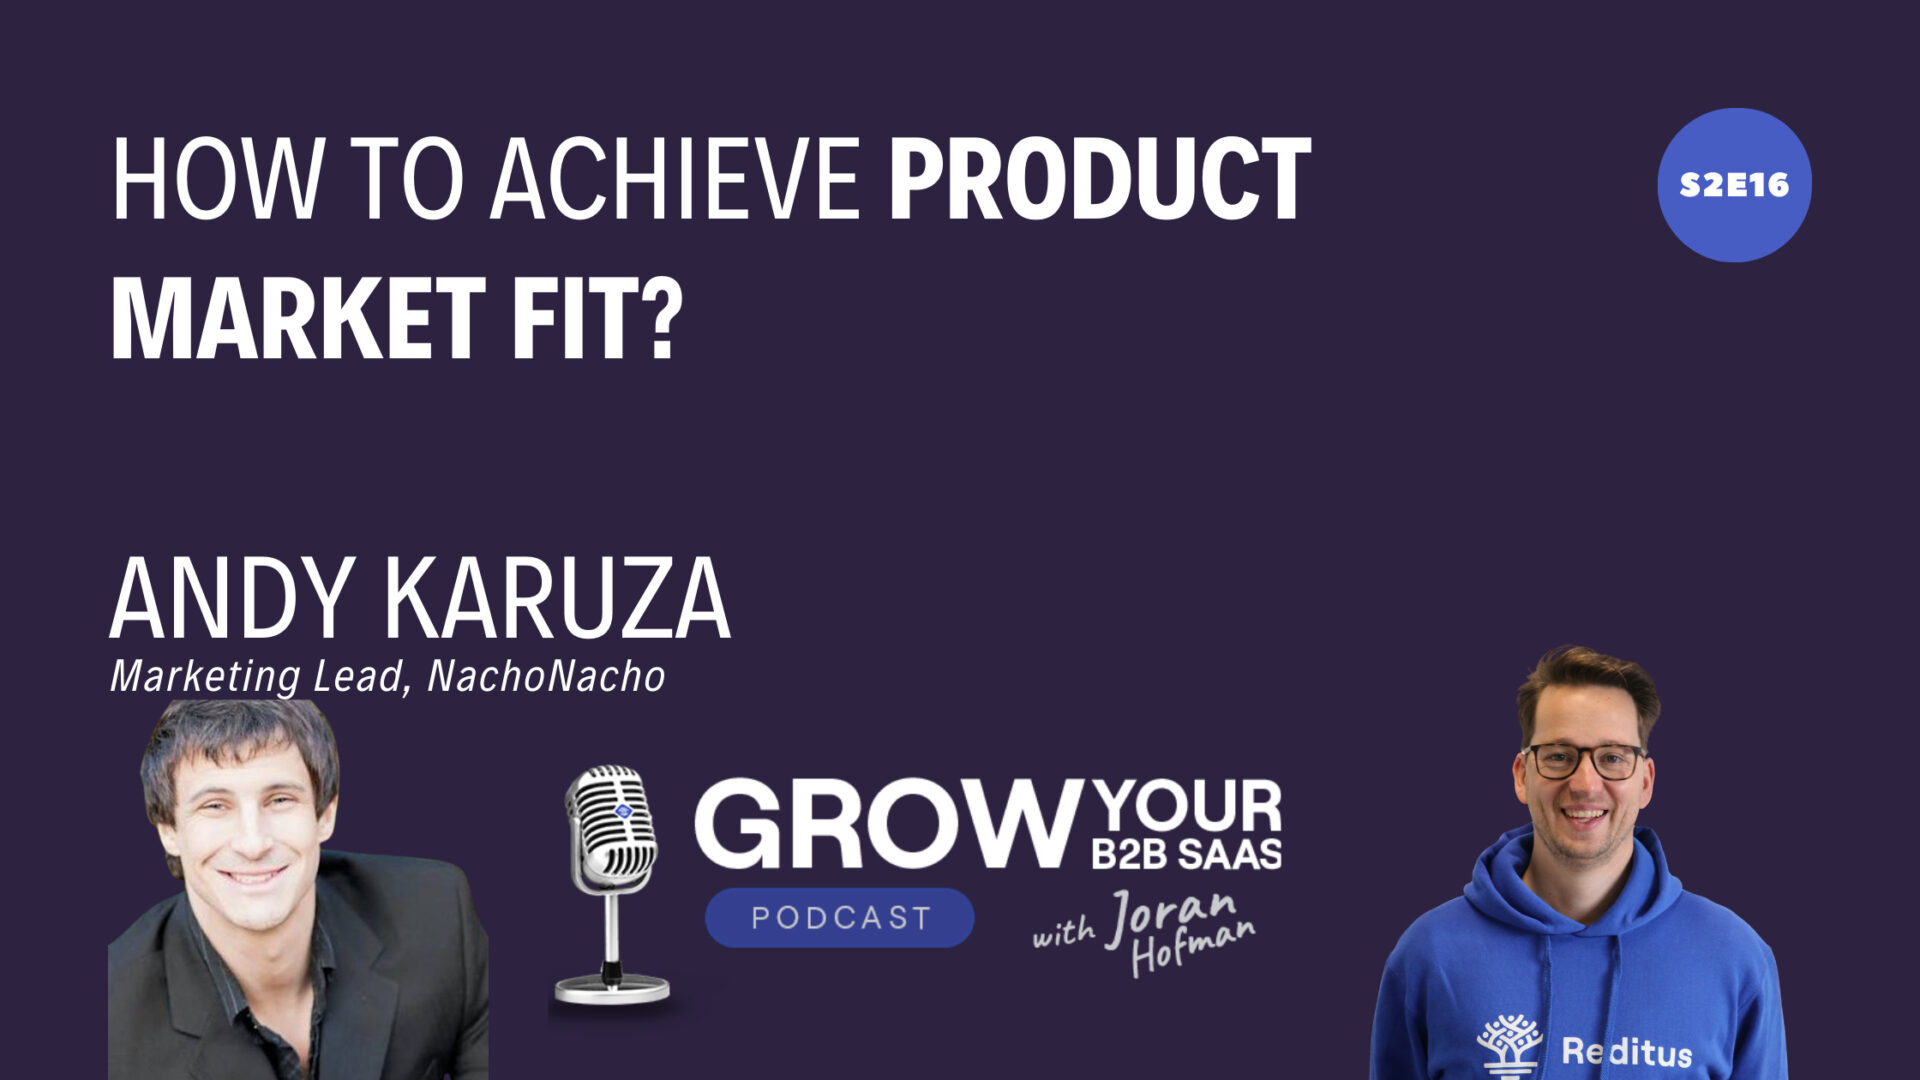 https://www.getreditus.com/podcast/s2e16-how-to-achieve-product-market-fit-with-andy-karuza/